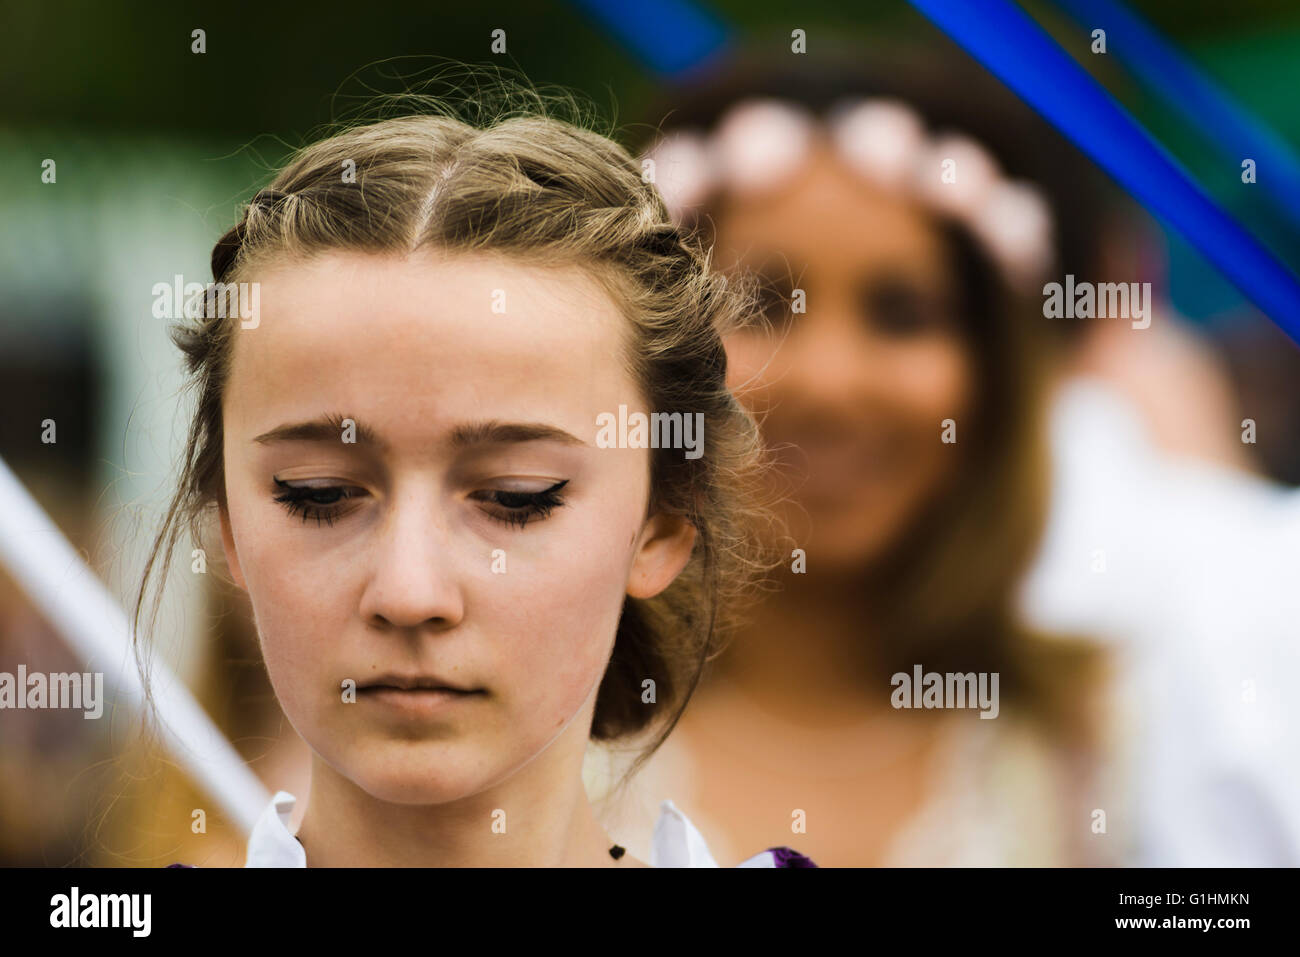 Portrait of a young woman looking down while dancing a traditional folk dance around a maypole,Bavaria,Germany Stock Photo